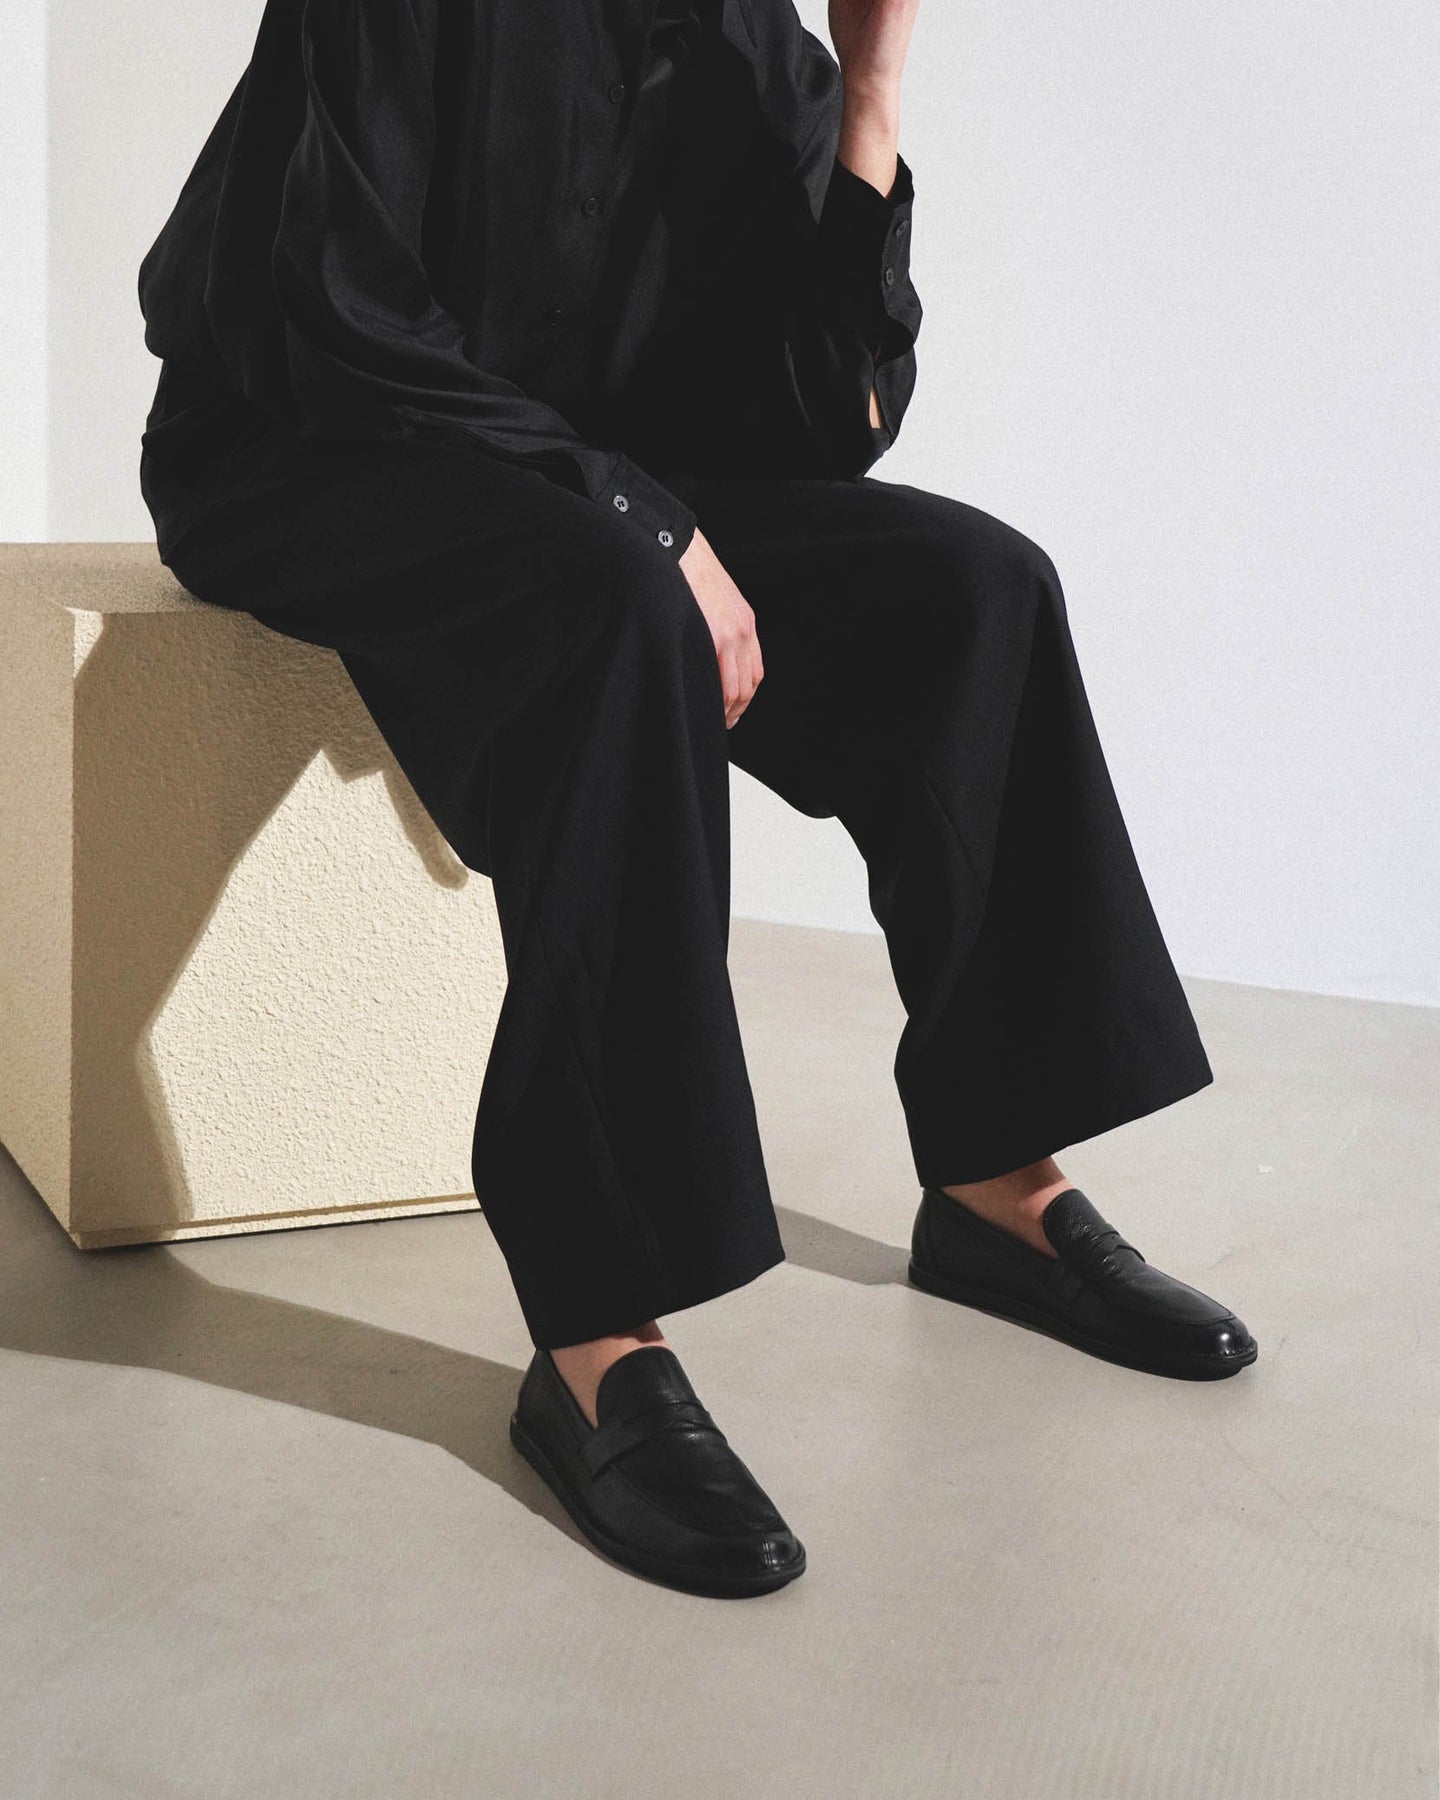 Shop The Row Cary Black Leather Loafers